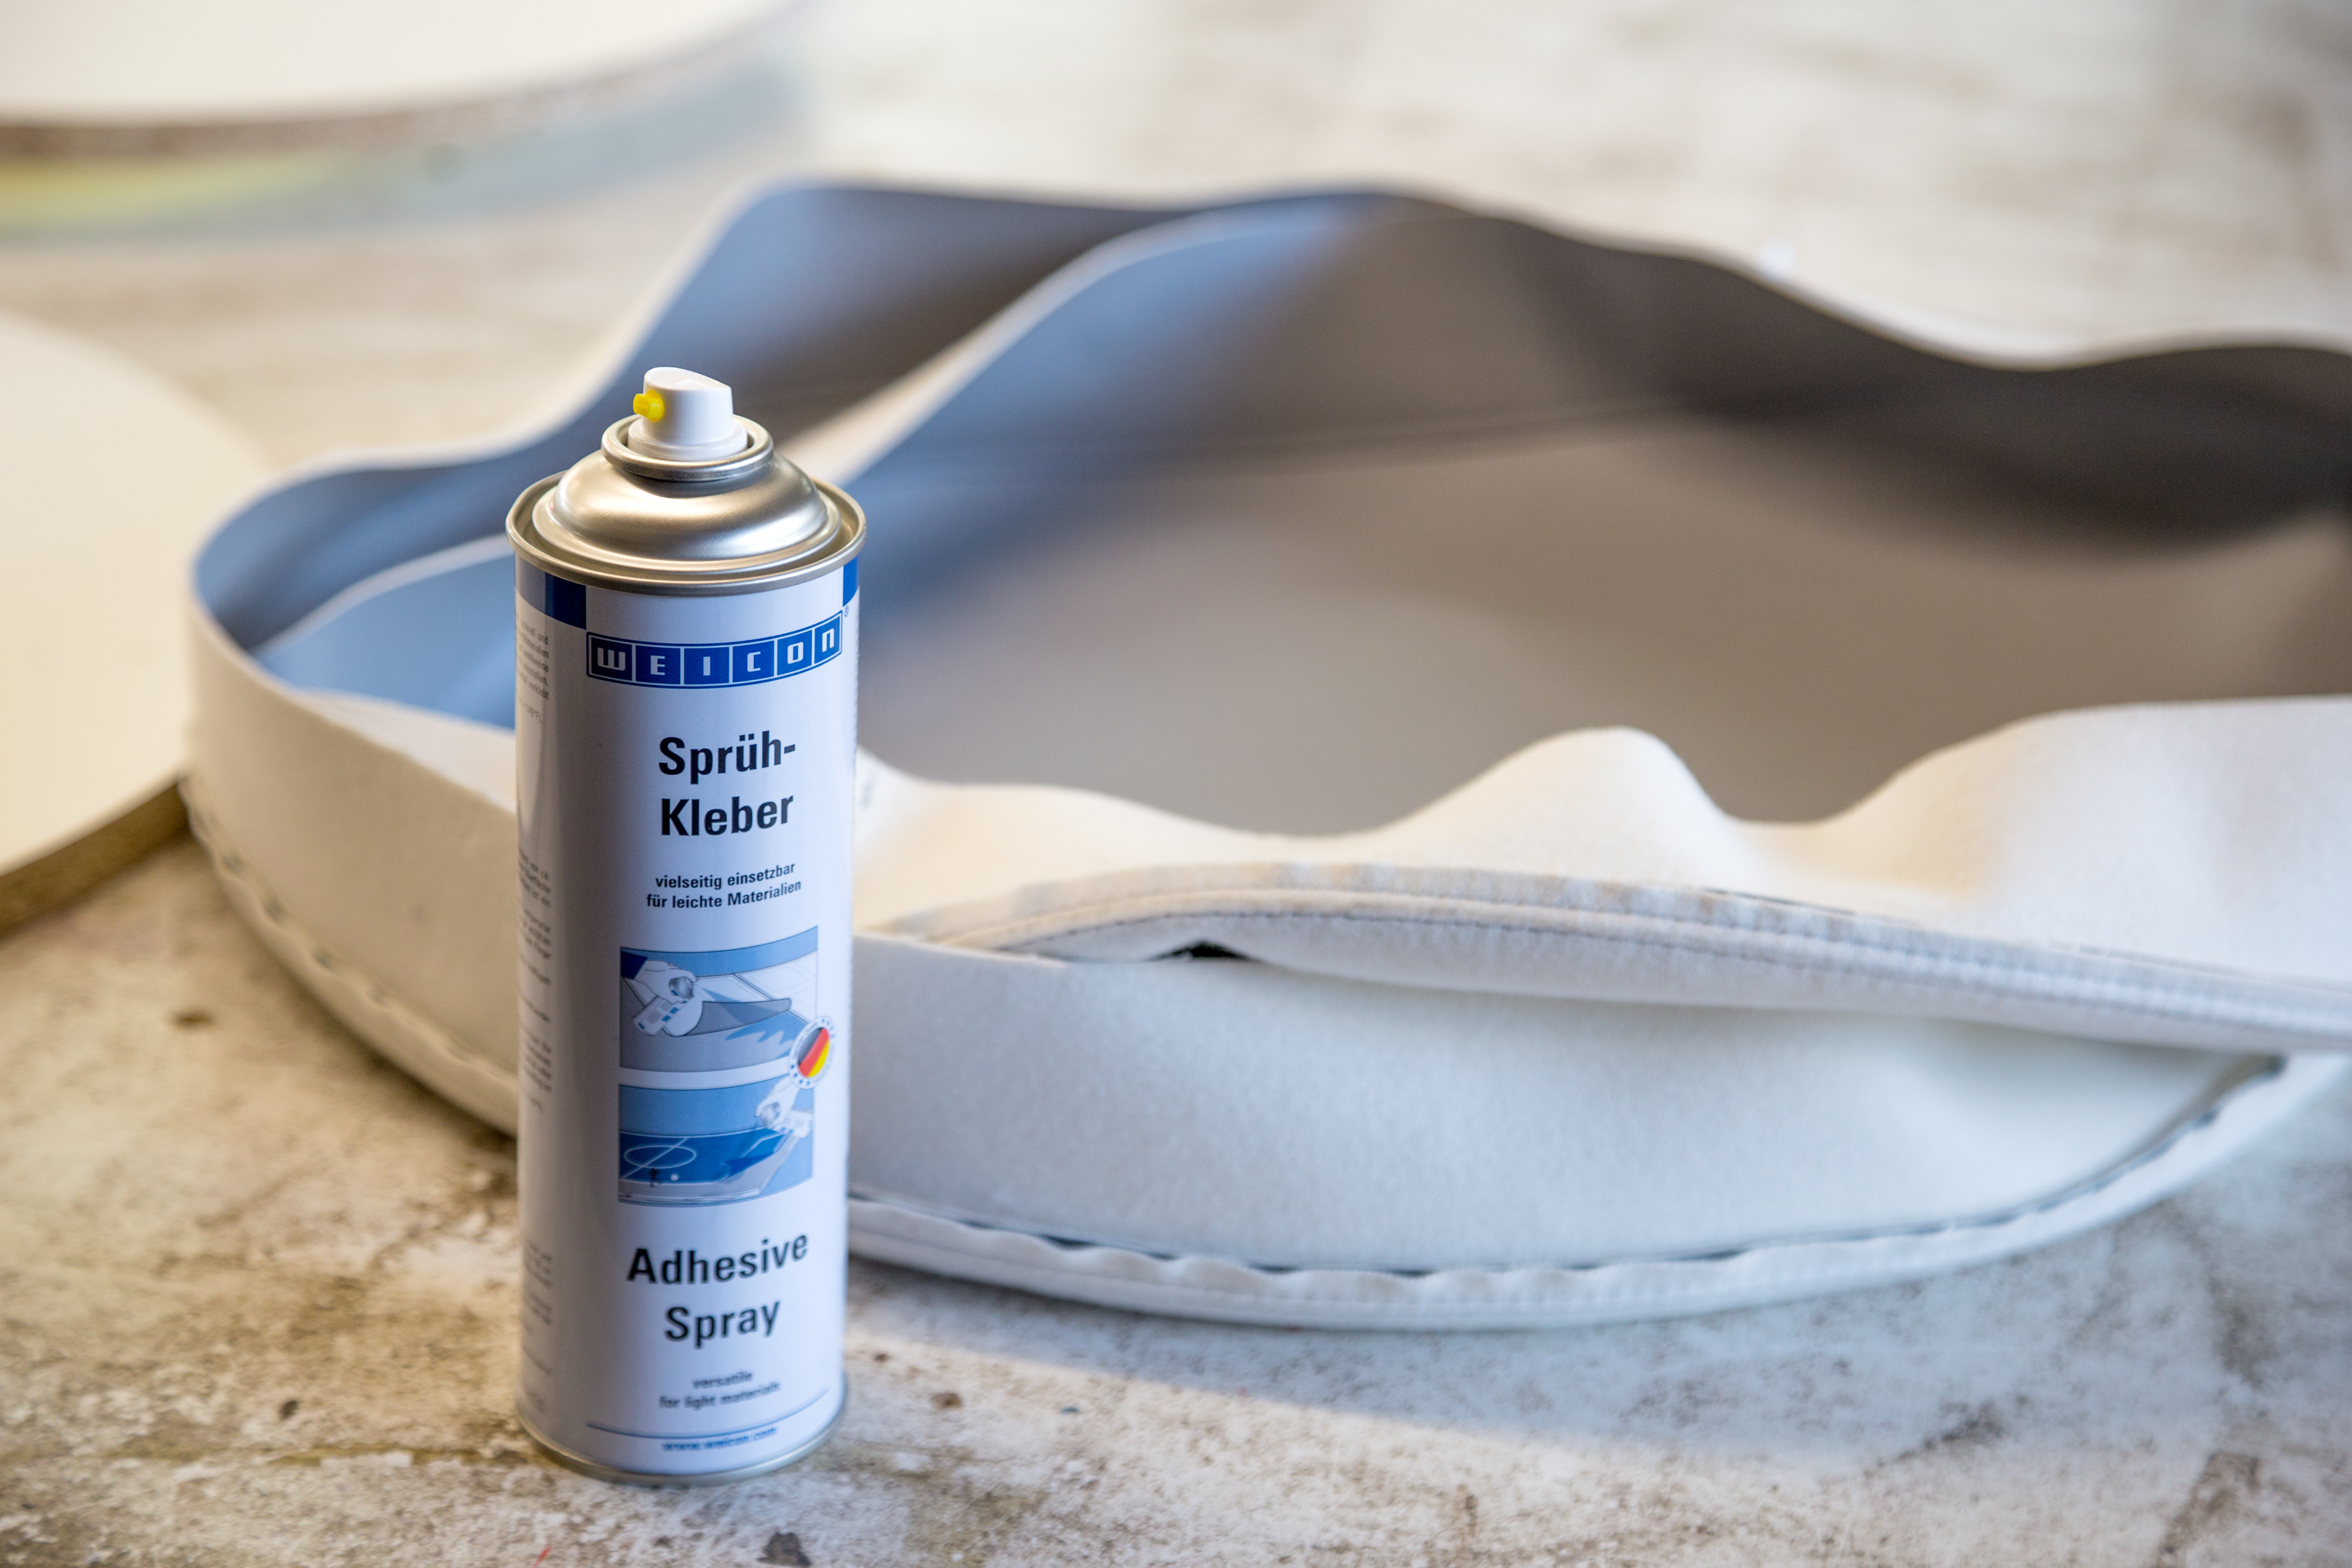 Adhesive Spray XT | sprayable contact adhesive, ideal for cardboard and paper